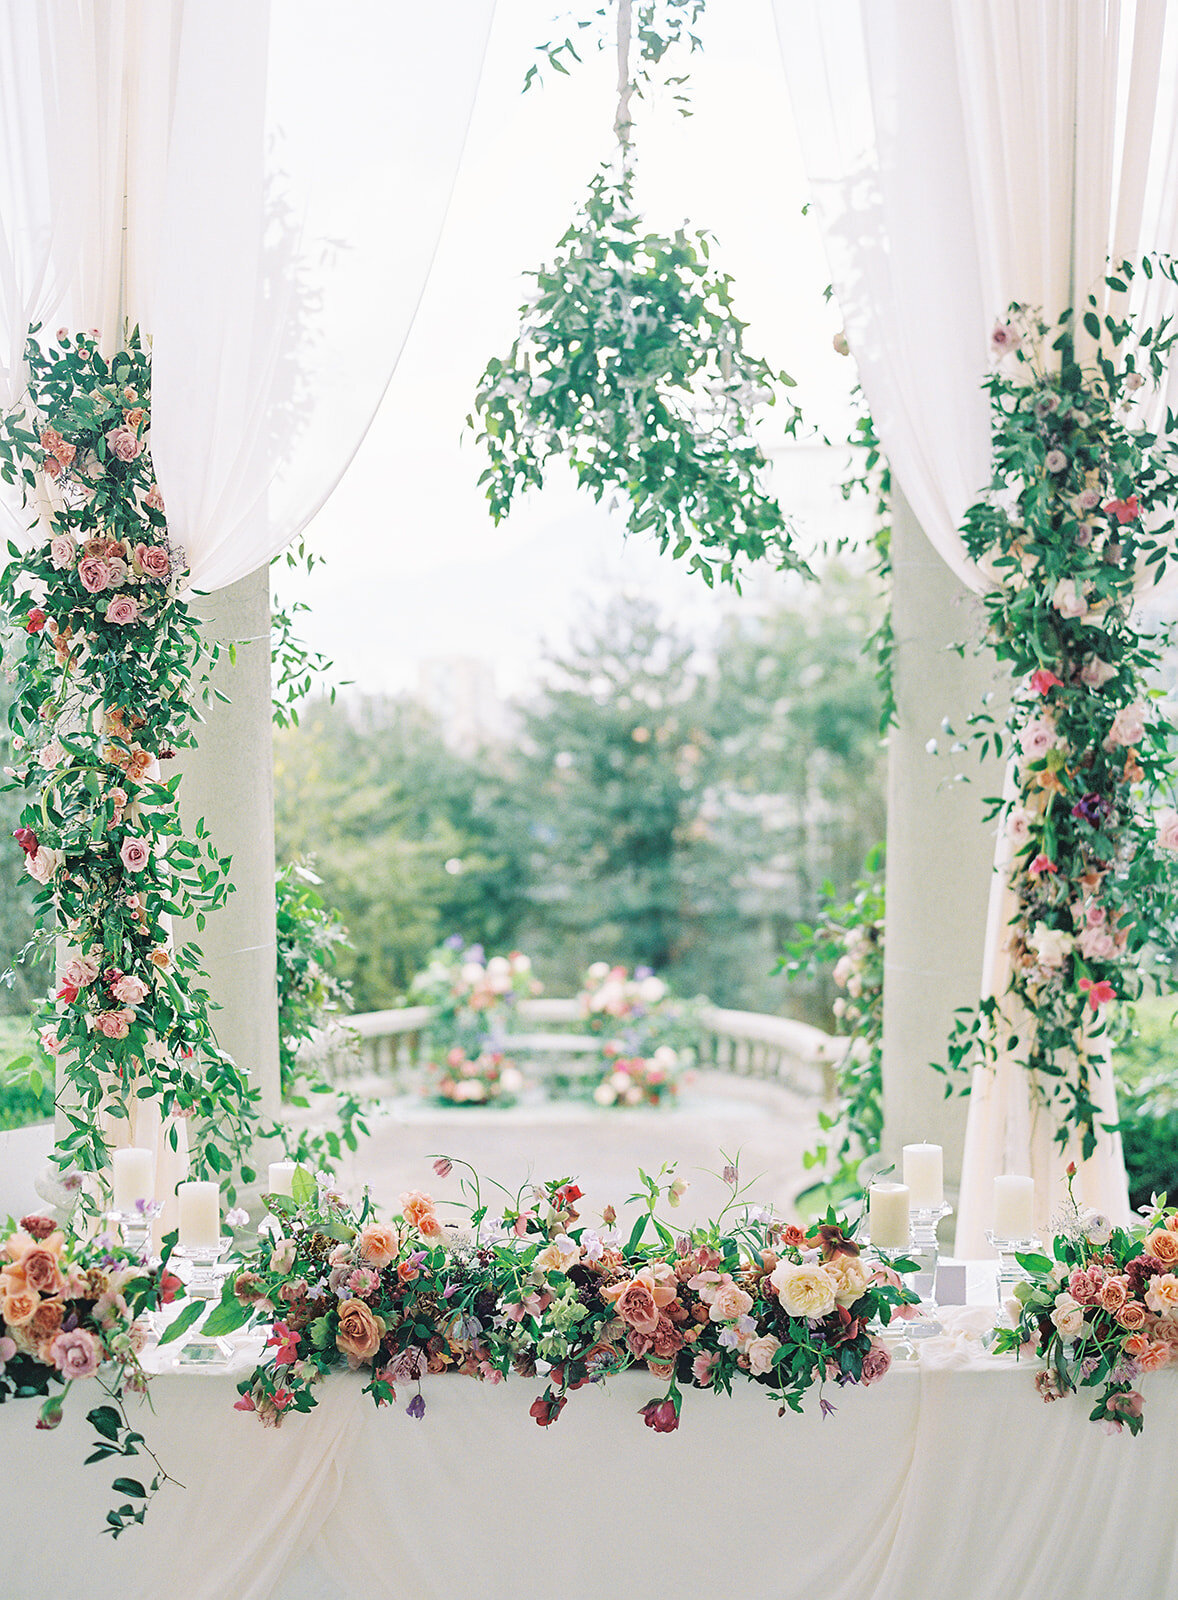 draping and hanging flowers at reception